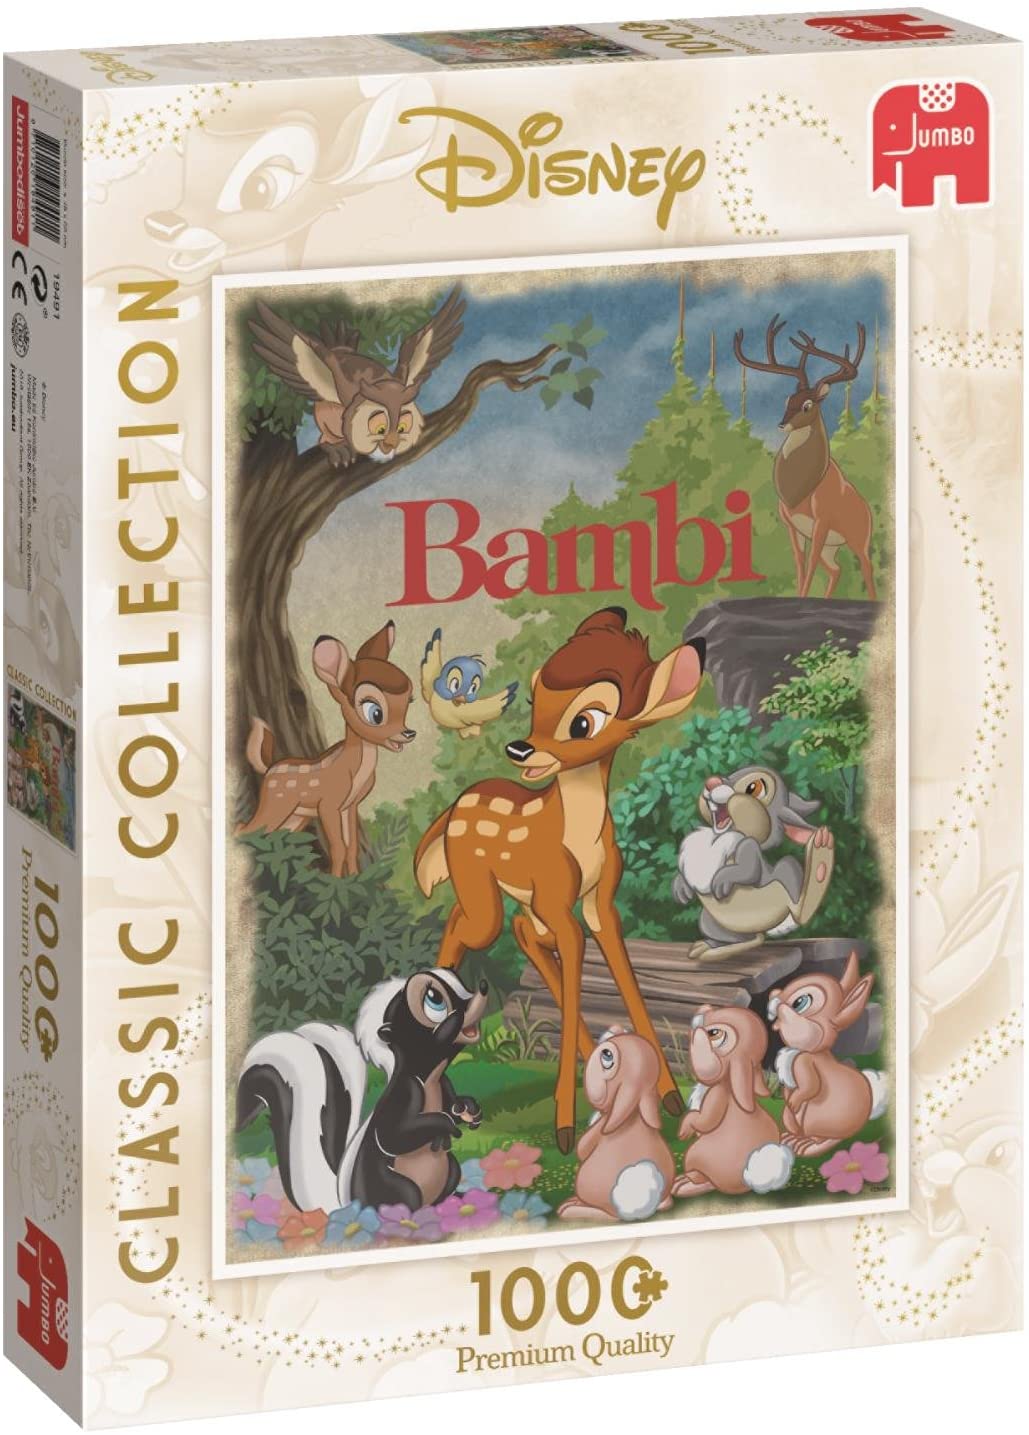 Bambi by Disney, 1000 Piece Puzzle